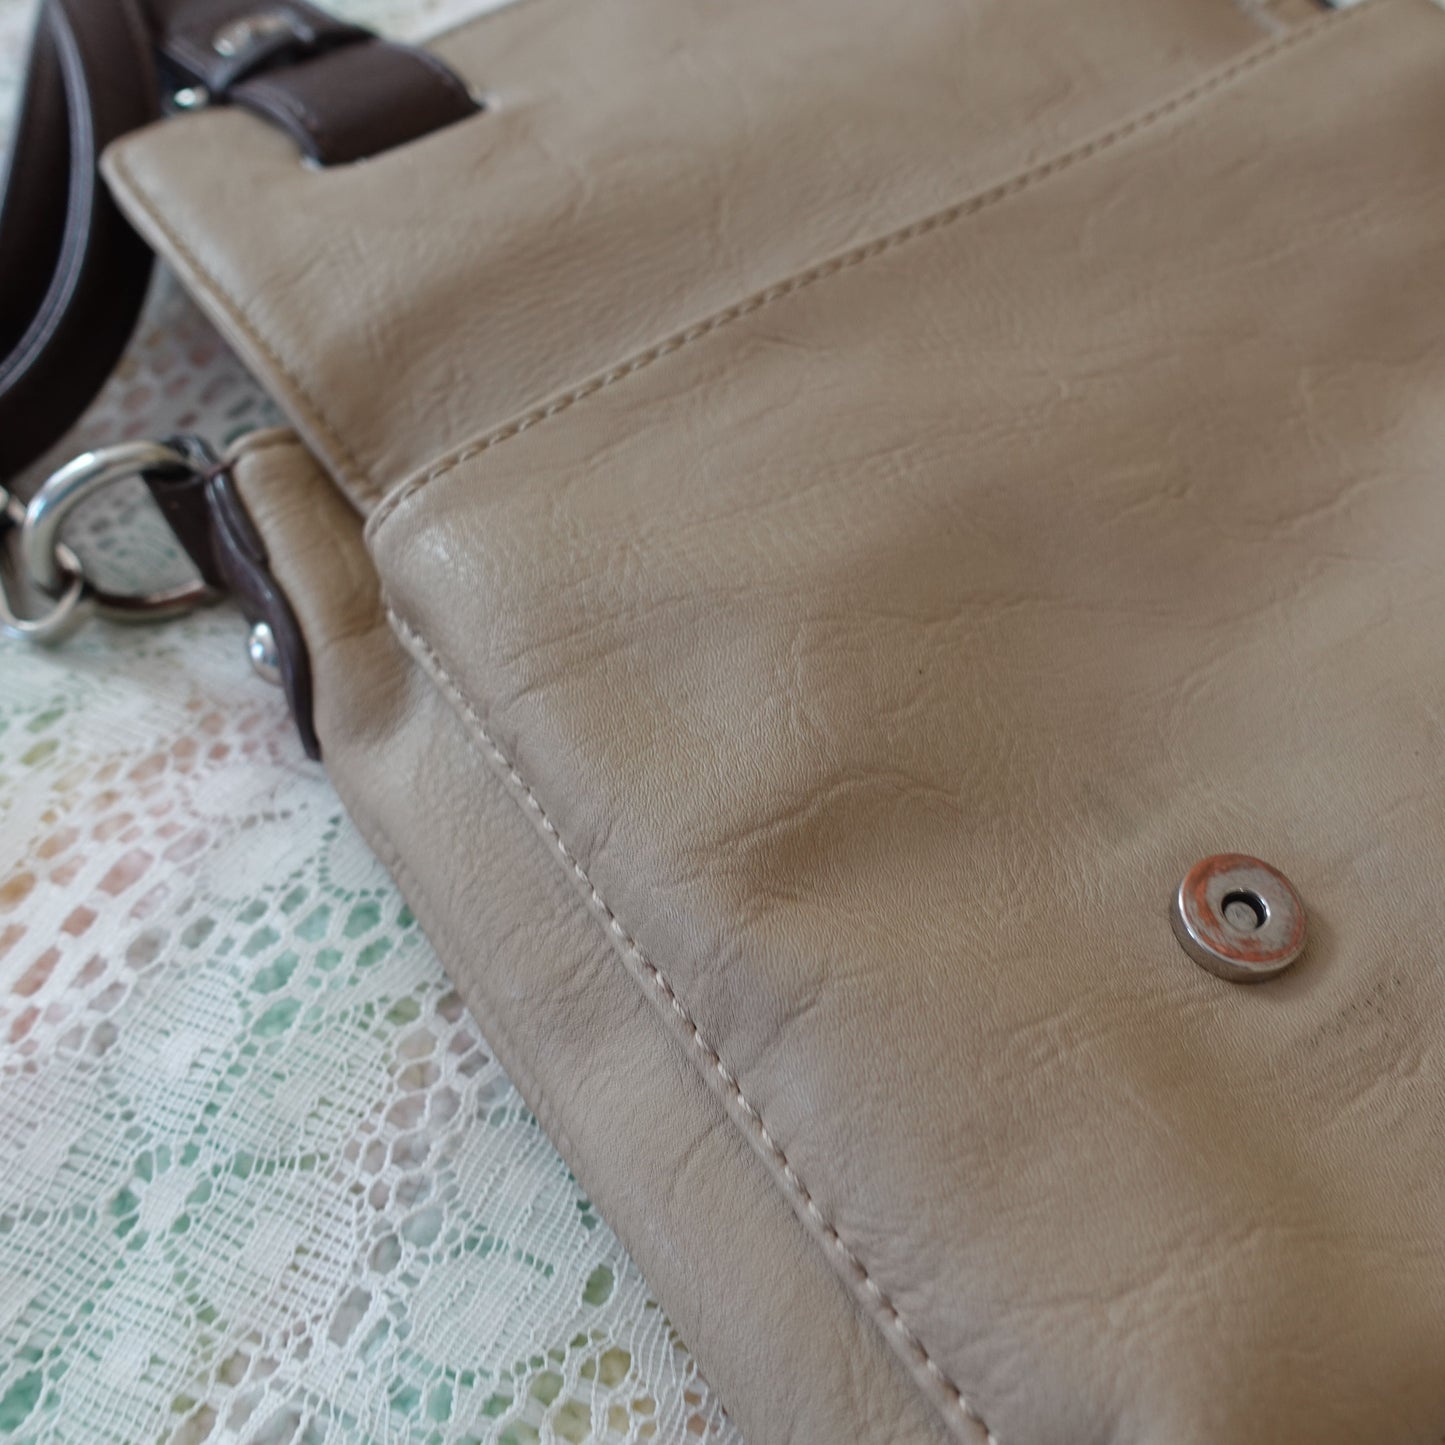 pleather tan and brown crossbody bag